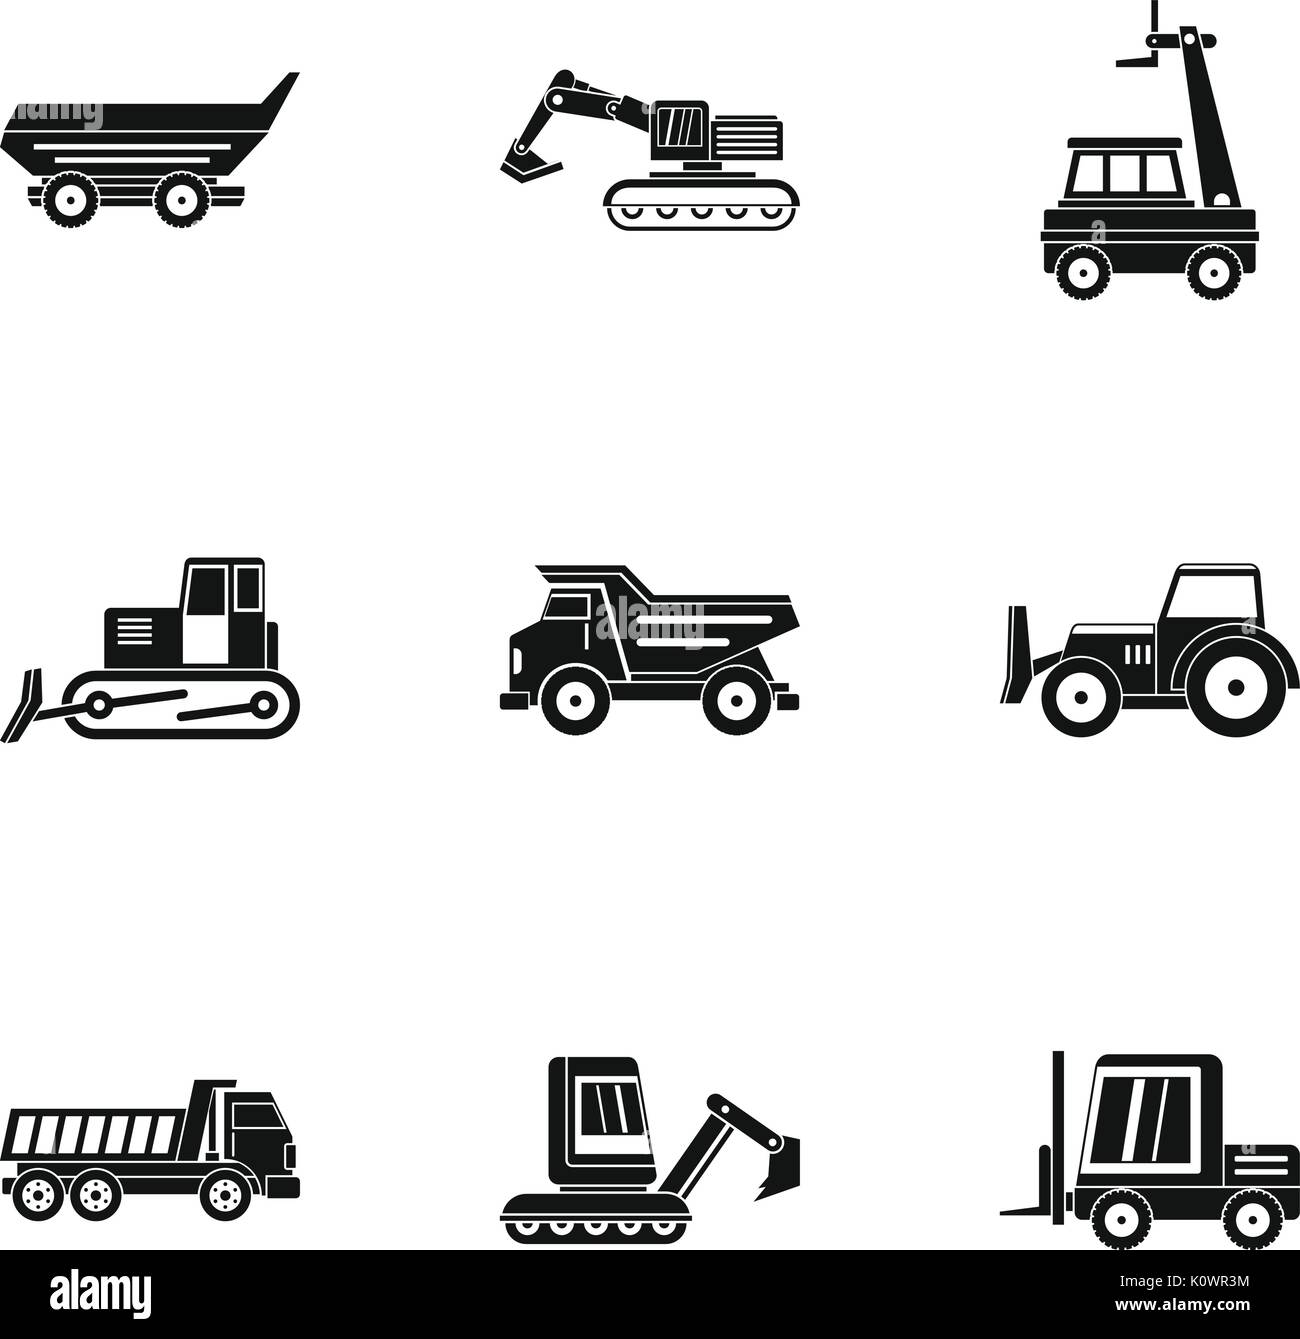 Building heavy vehicle icon set, simple style Stock Vector